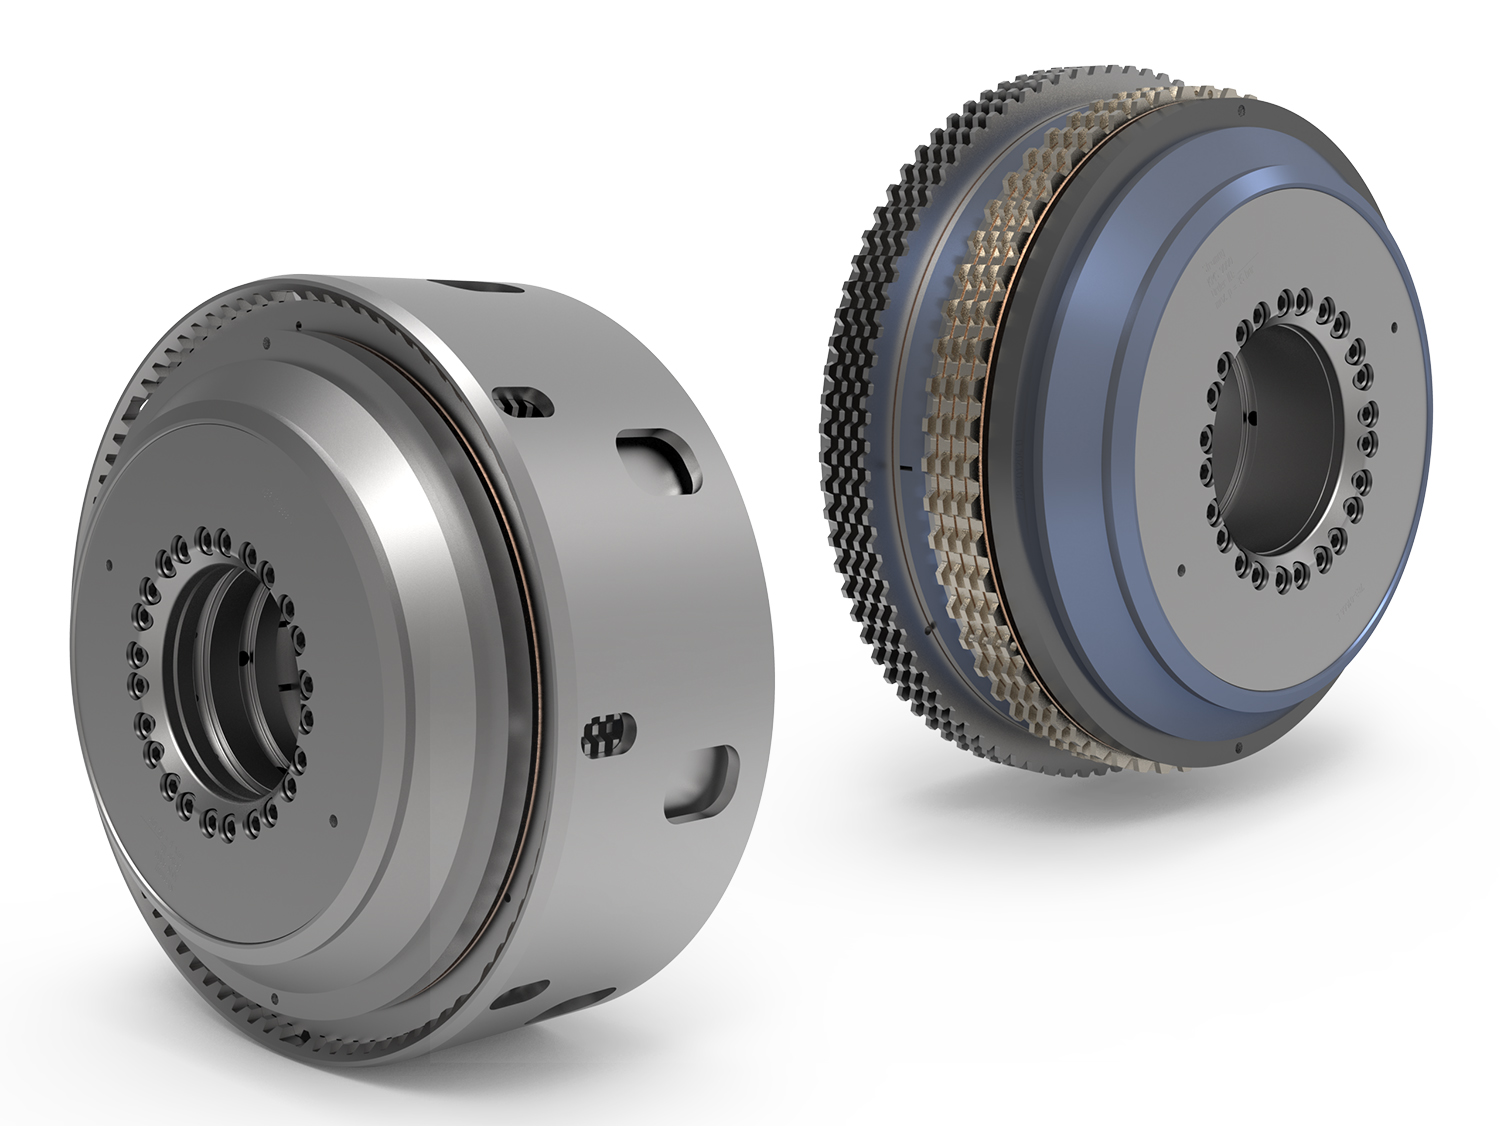 The KMS multi-disc hydraulic clutch is designed specifically to meet the needs of marine propulsion systems.